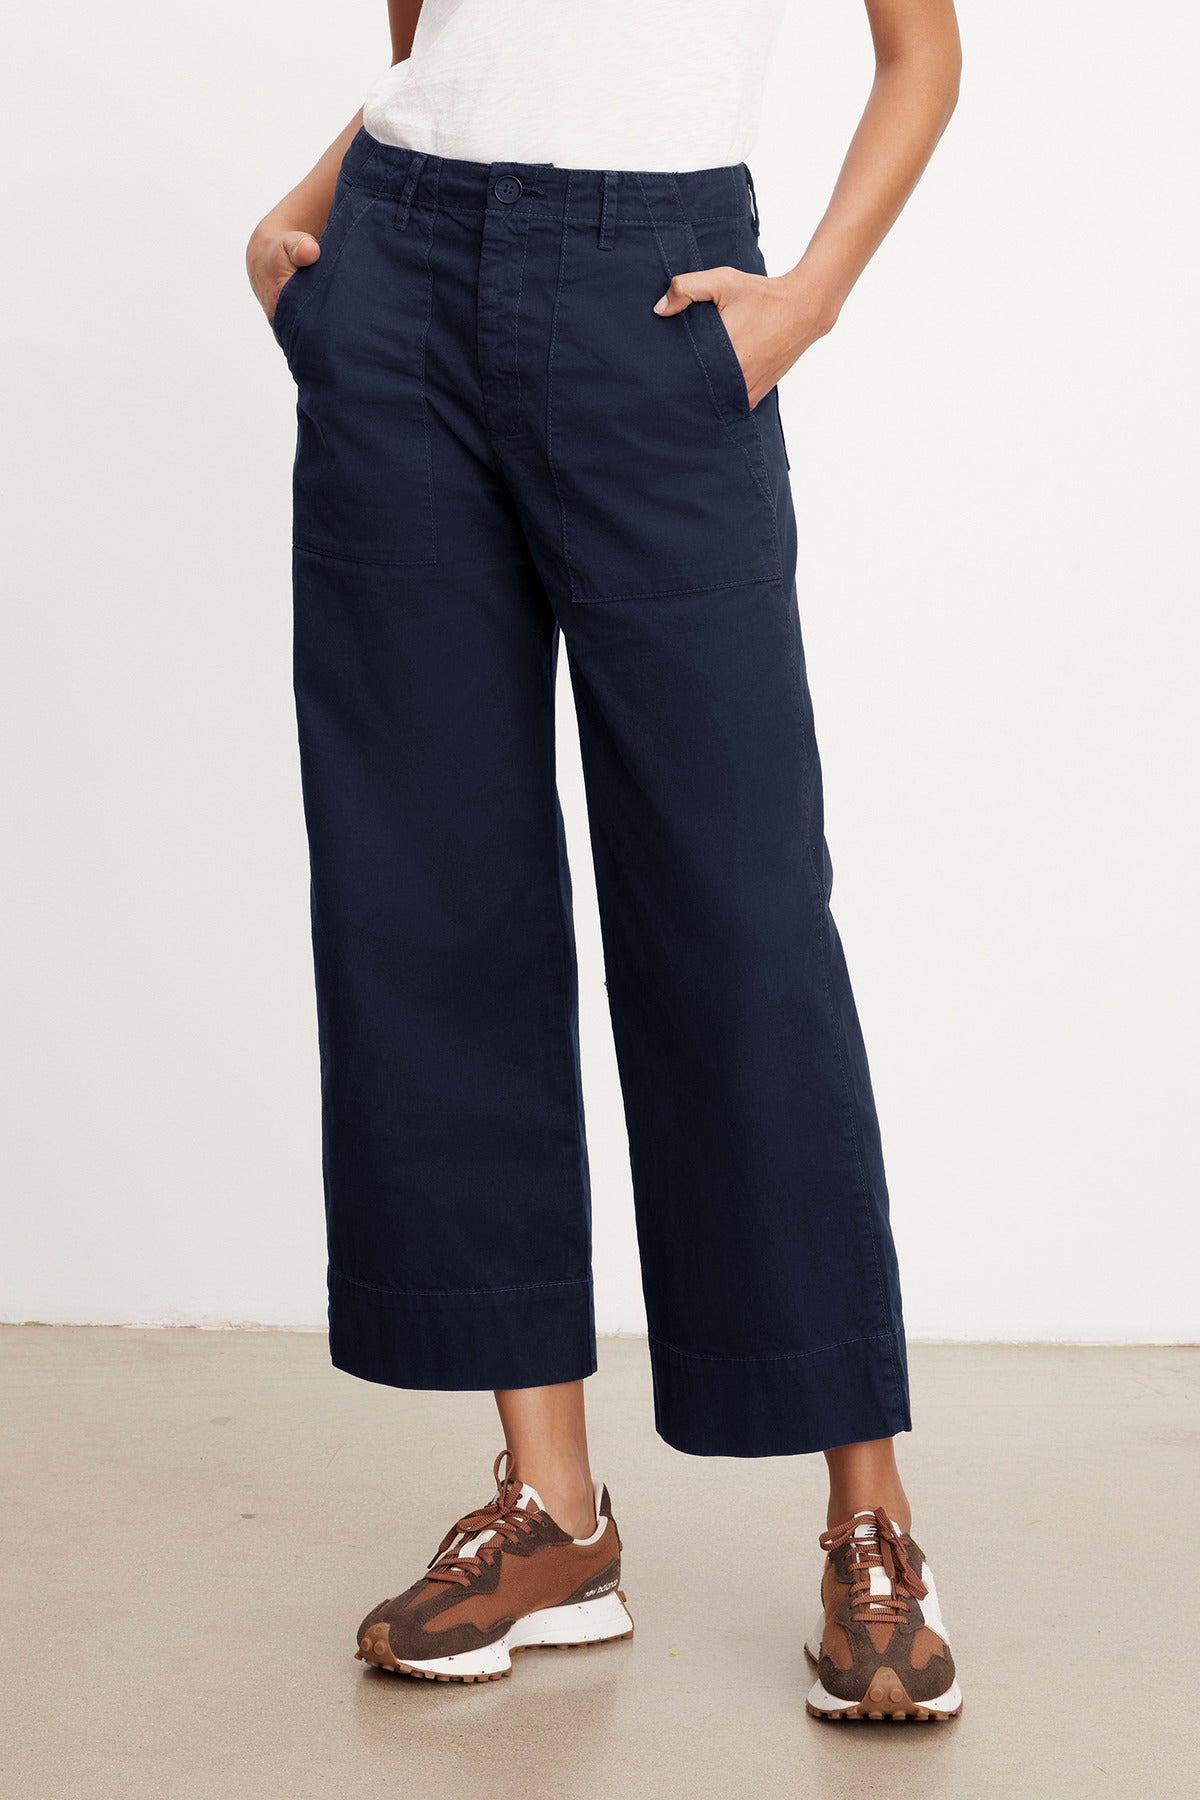 A person wearing navy blue Velvet by Graham & Spencer MYA COTTON CANVAS PANTS and a white shirt paired with brown and white sneakers, standing in a neutral pose against a plain background.-36999933886657